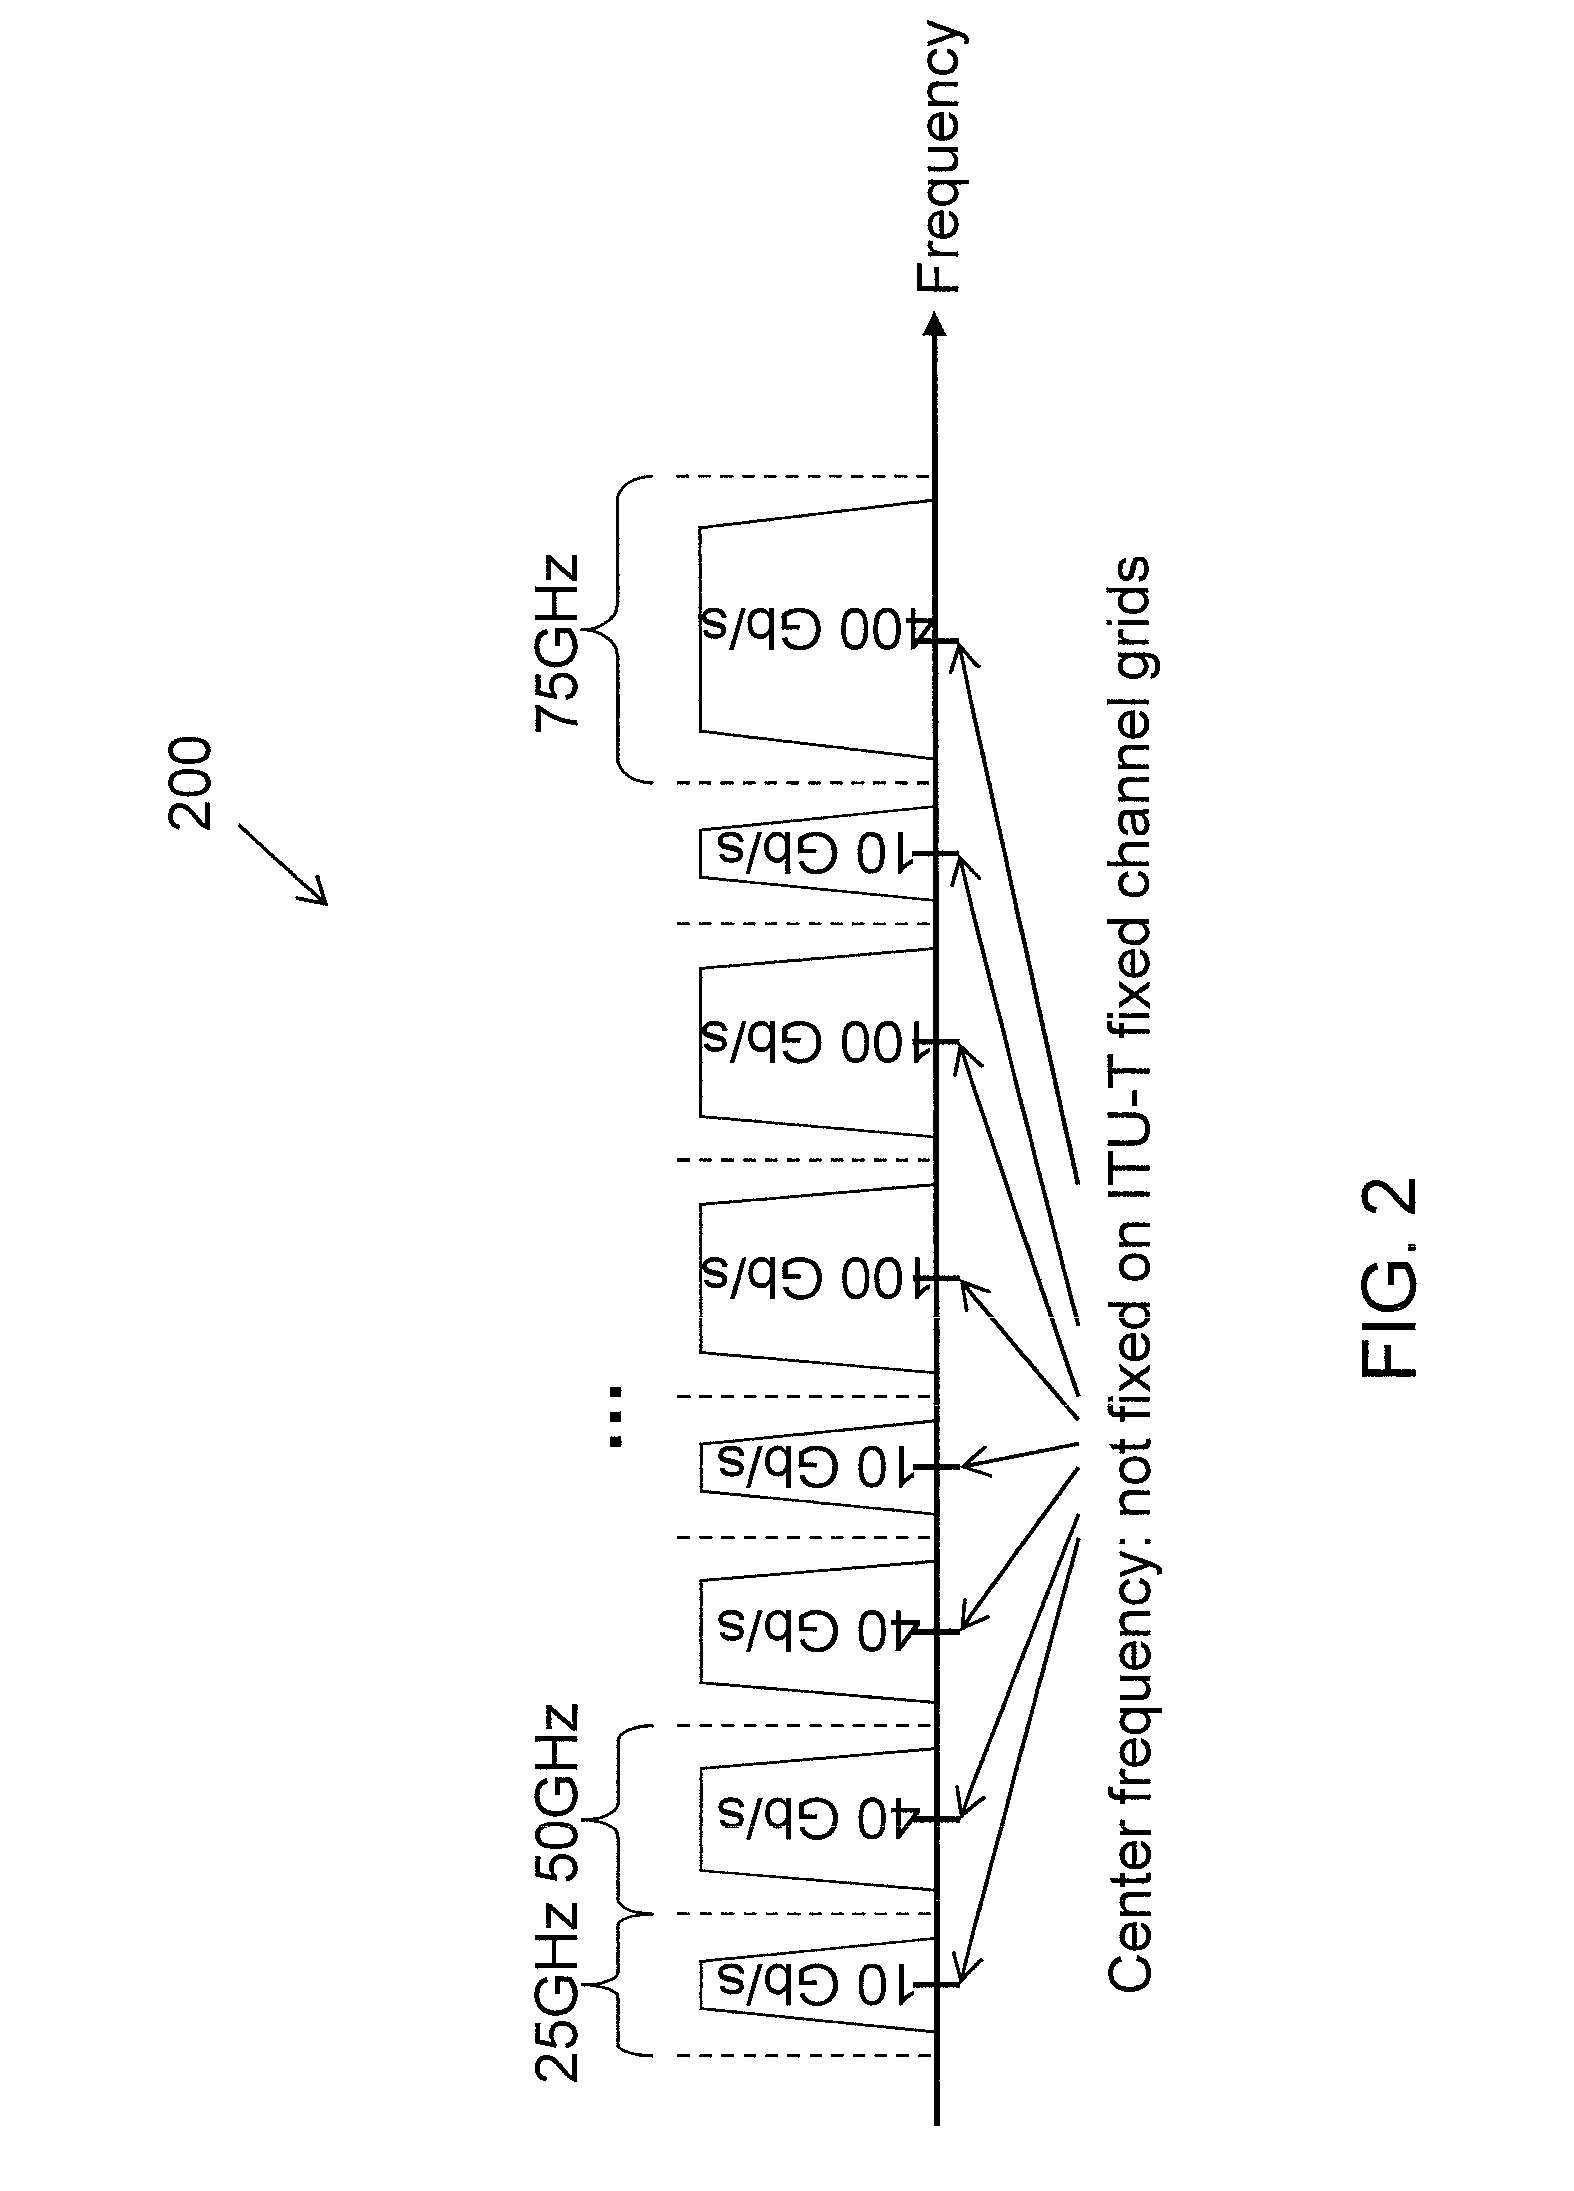 Routing, wavelength assignment, and spectrum allocation in wavelength convertible flexible optical wavelength-division multiplexing networks